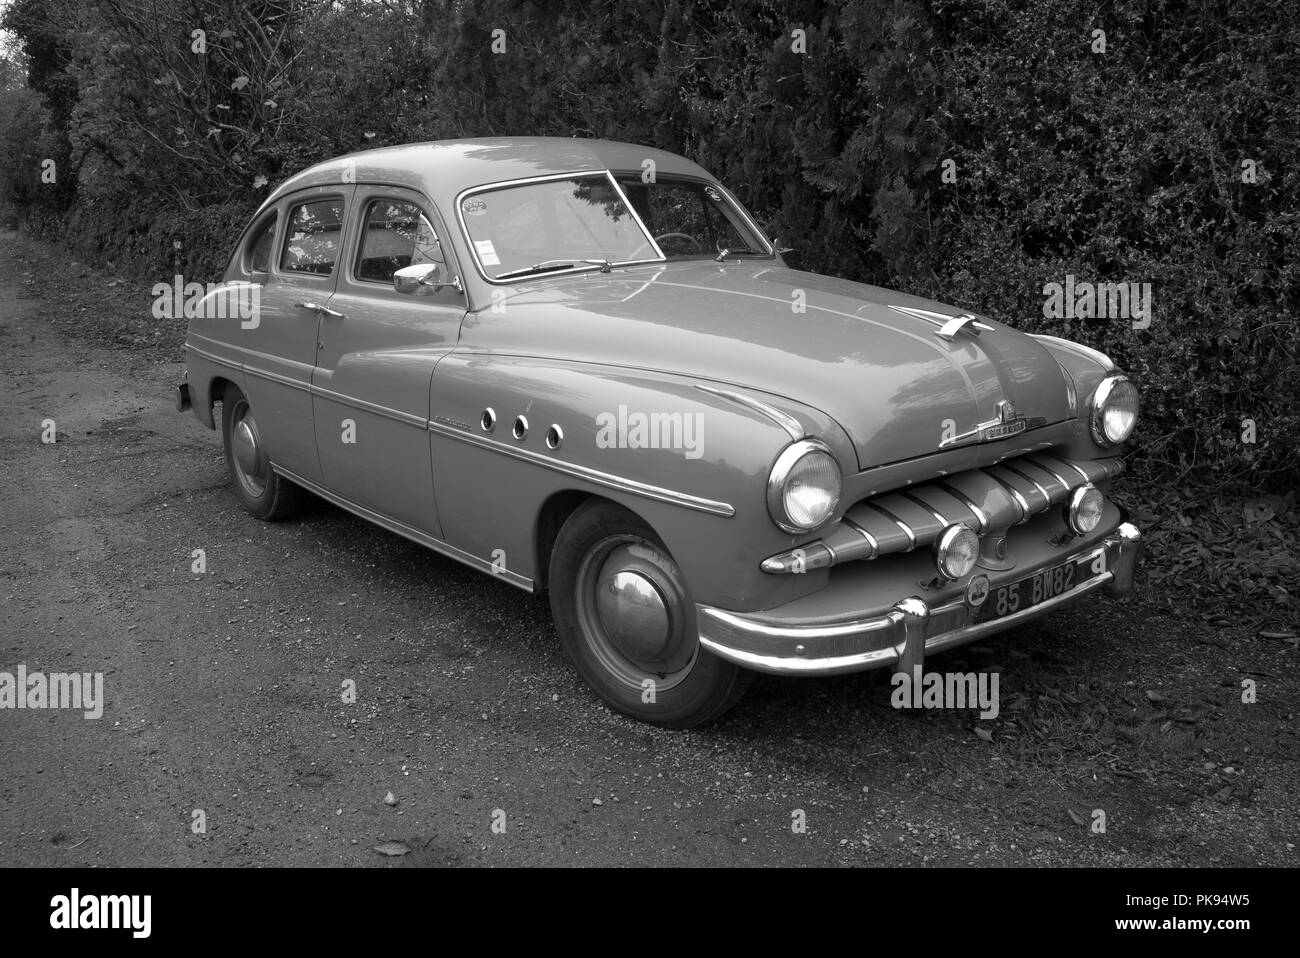 A classic 1950s Simca Vedette powered by a Ford V8 in the hamlet of St Martial, Varen, Taren et Garonne, Occitanie, France, Europe in the autumn Stock Photo